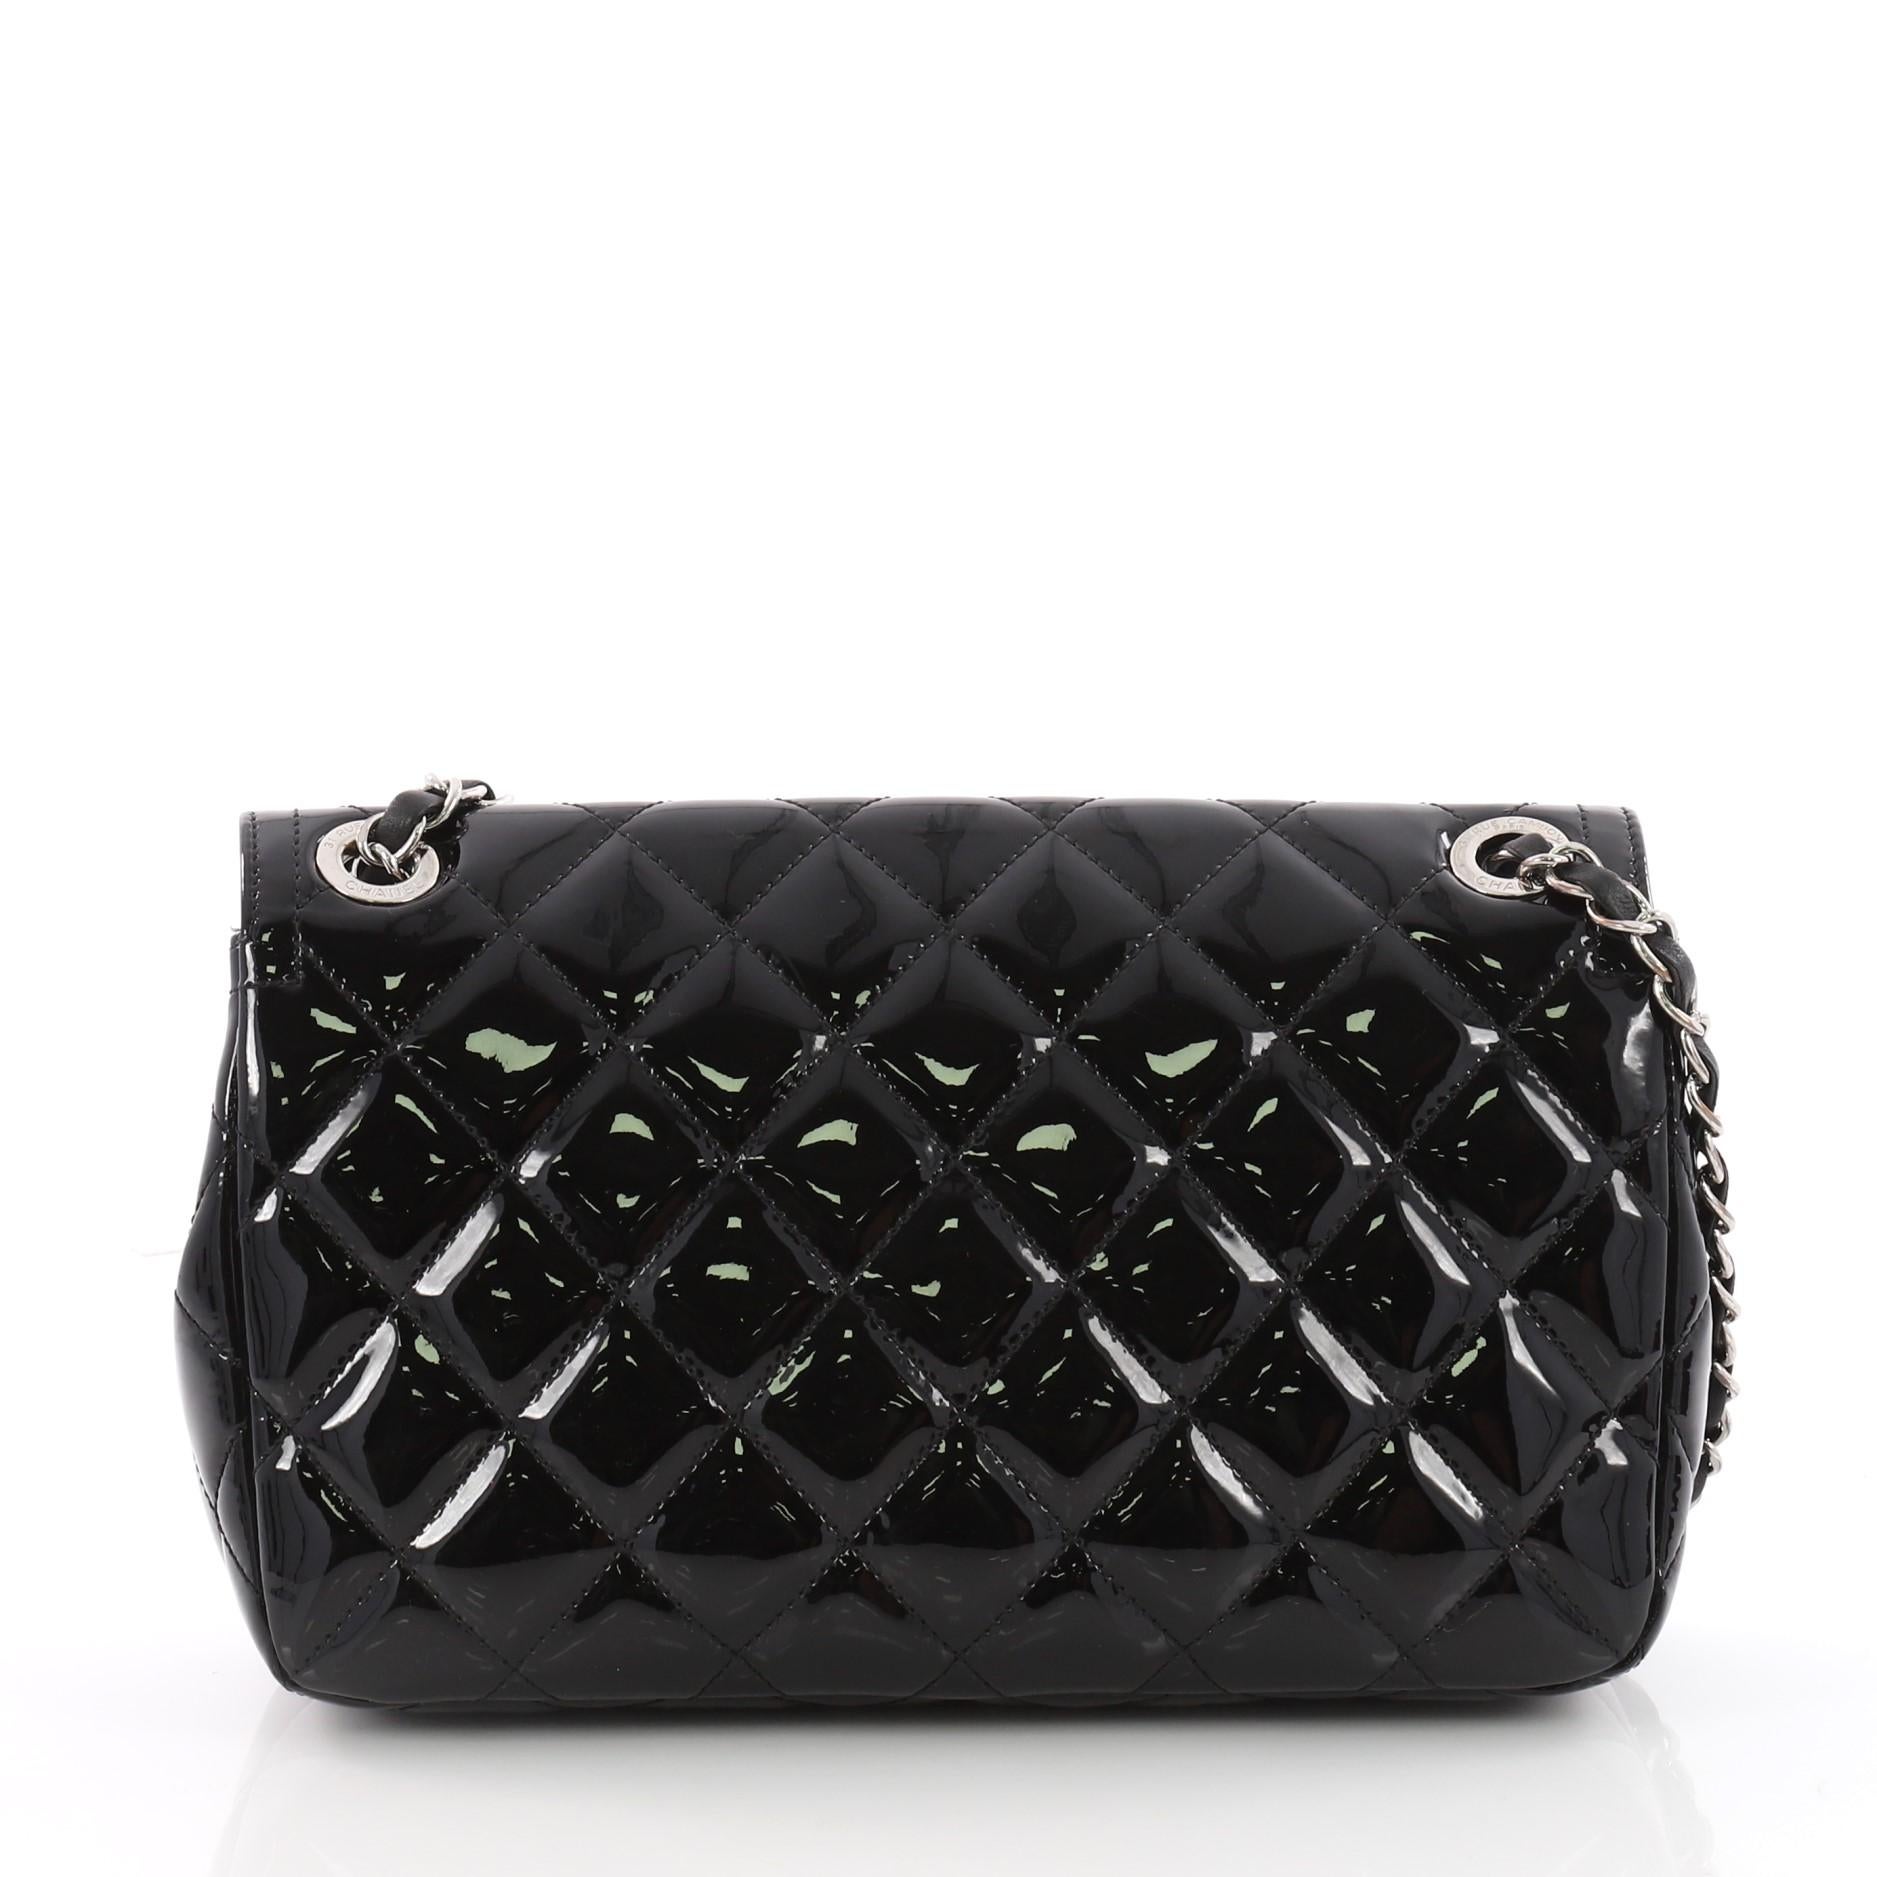 Black Chanel Coco Shine Flap Bag Quilted Patent Medium